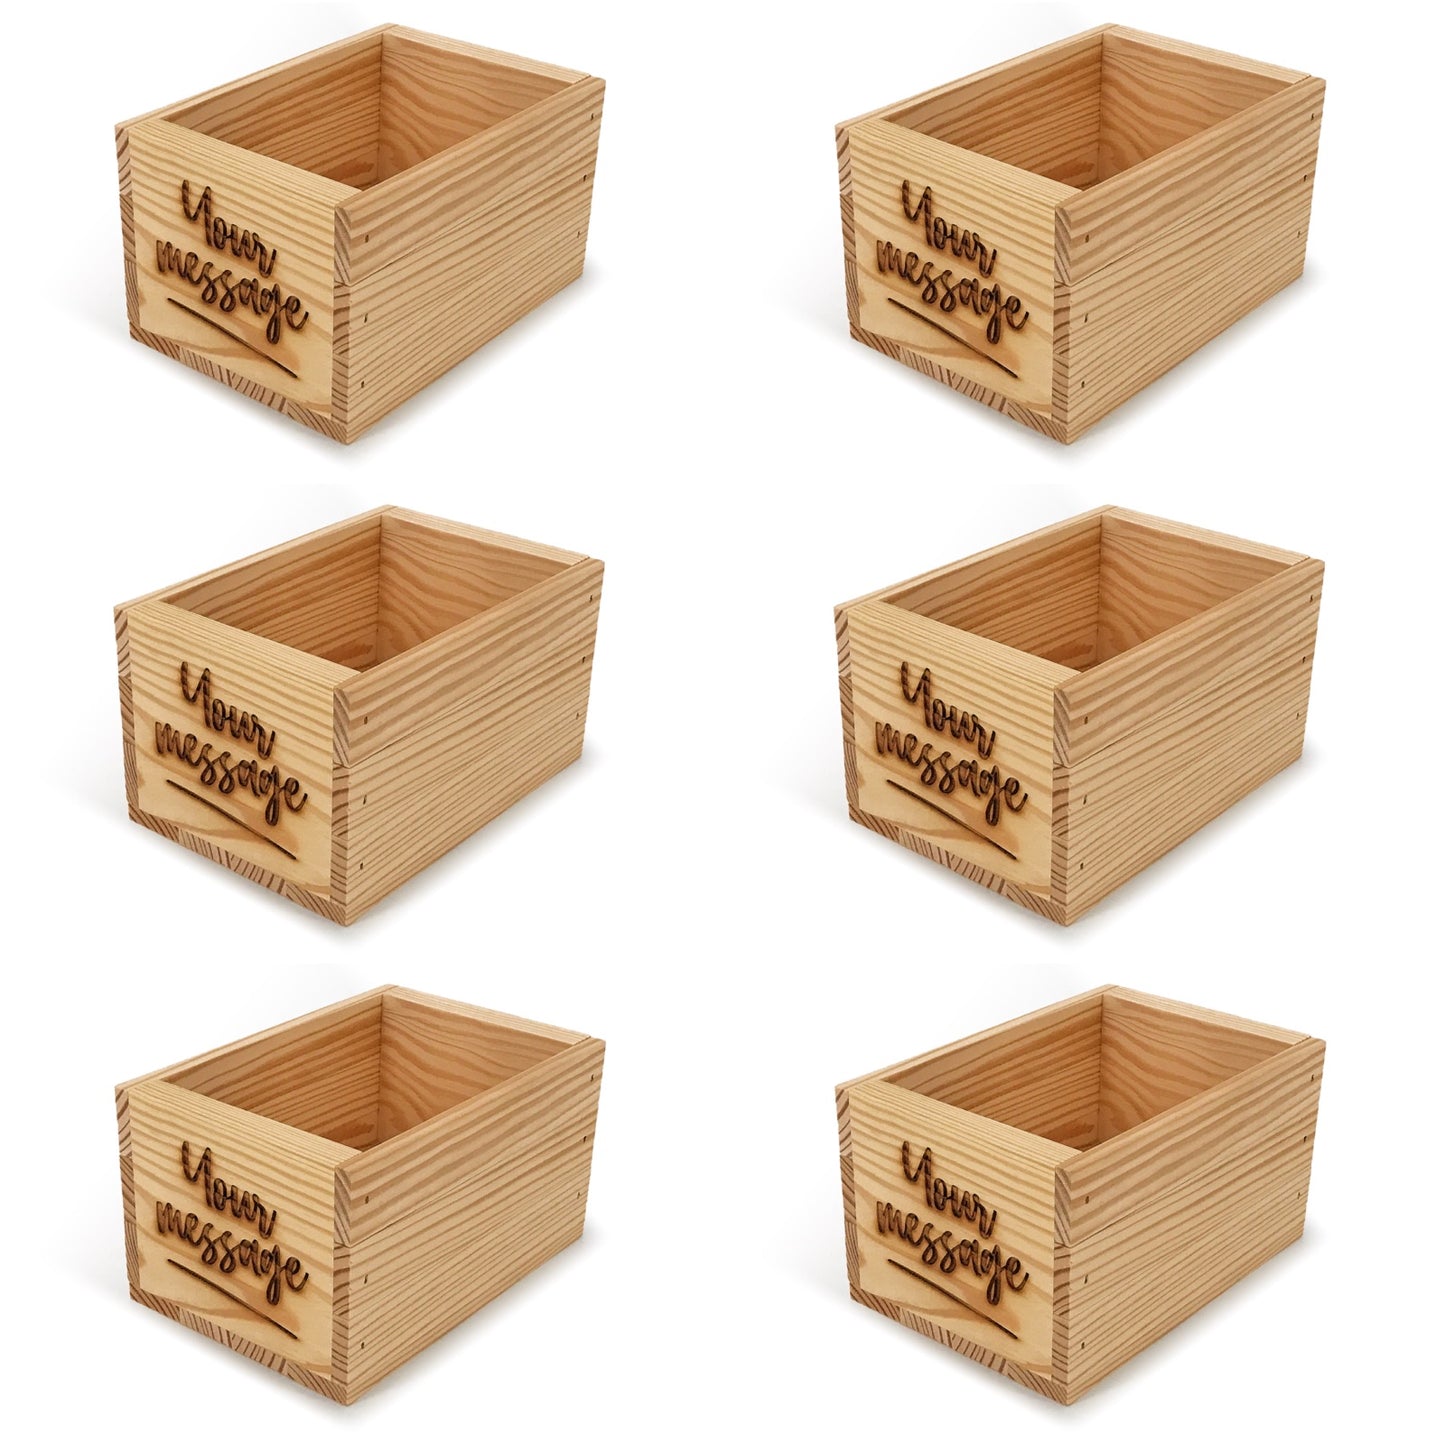 6 Small wooden crates with custom message 7x5x4.25